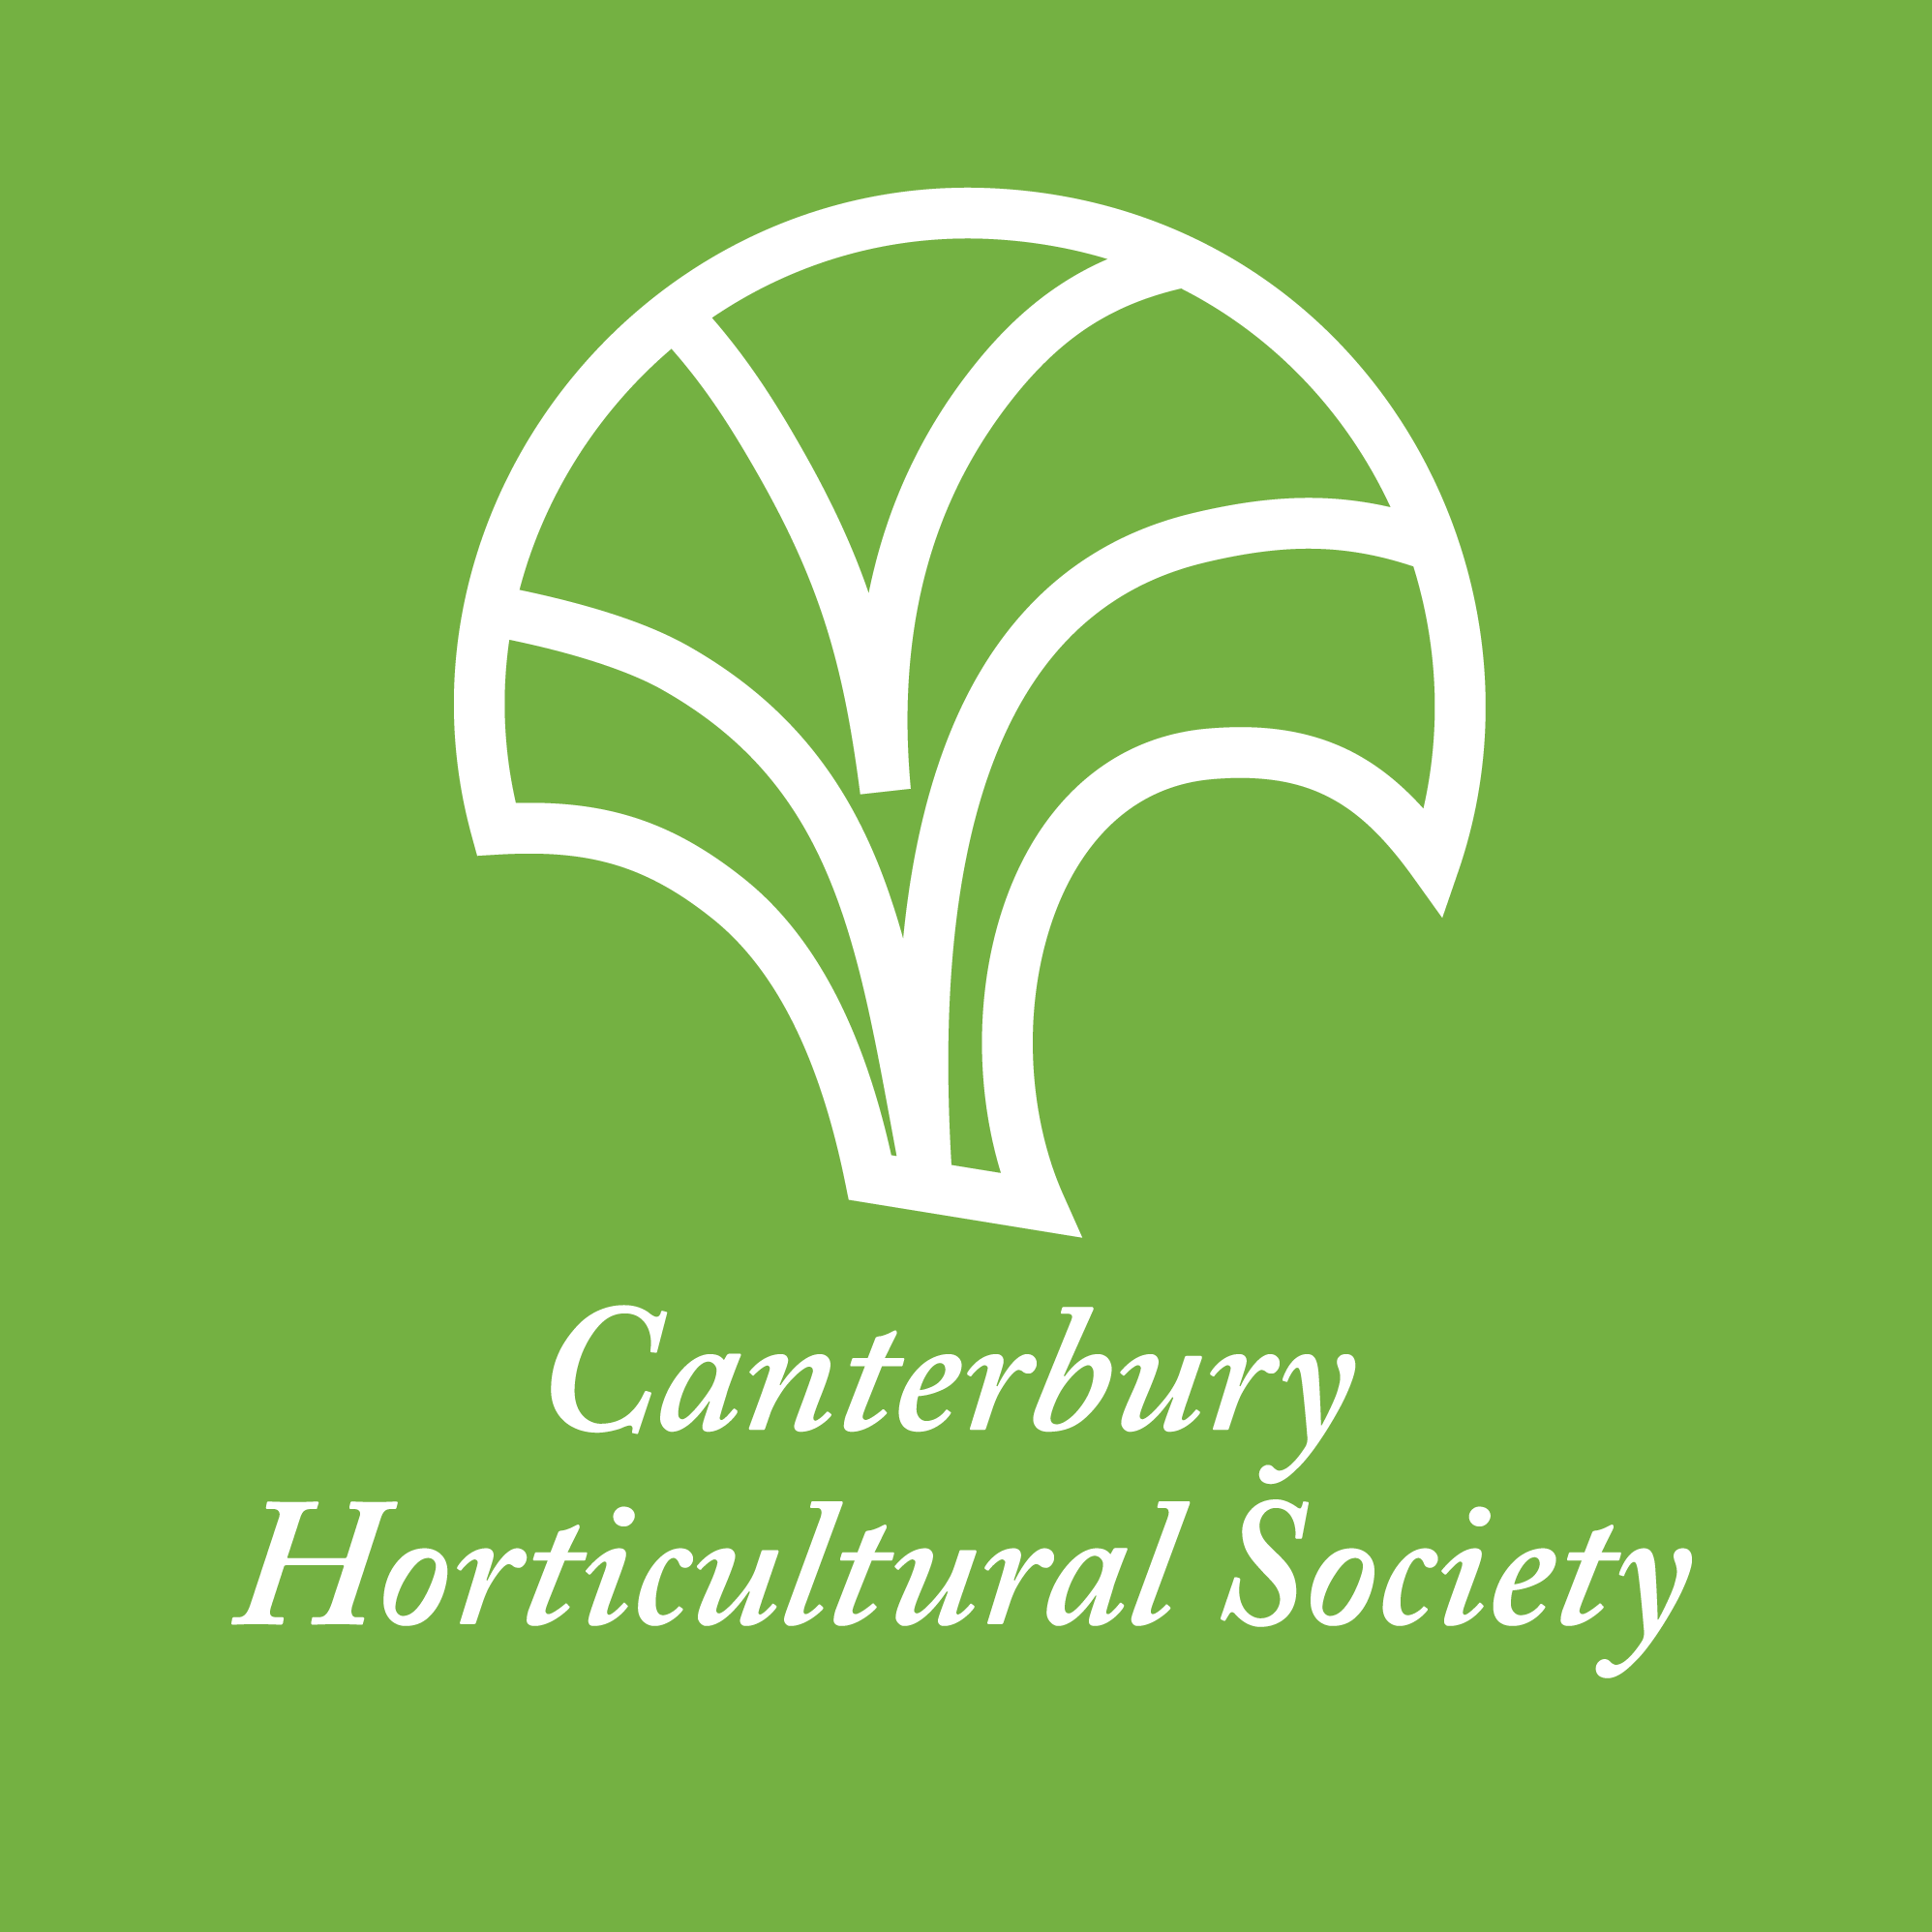 CHS - Canterbury Horticultural Society